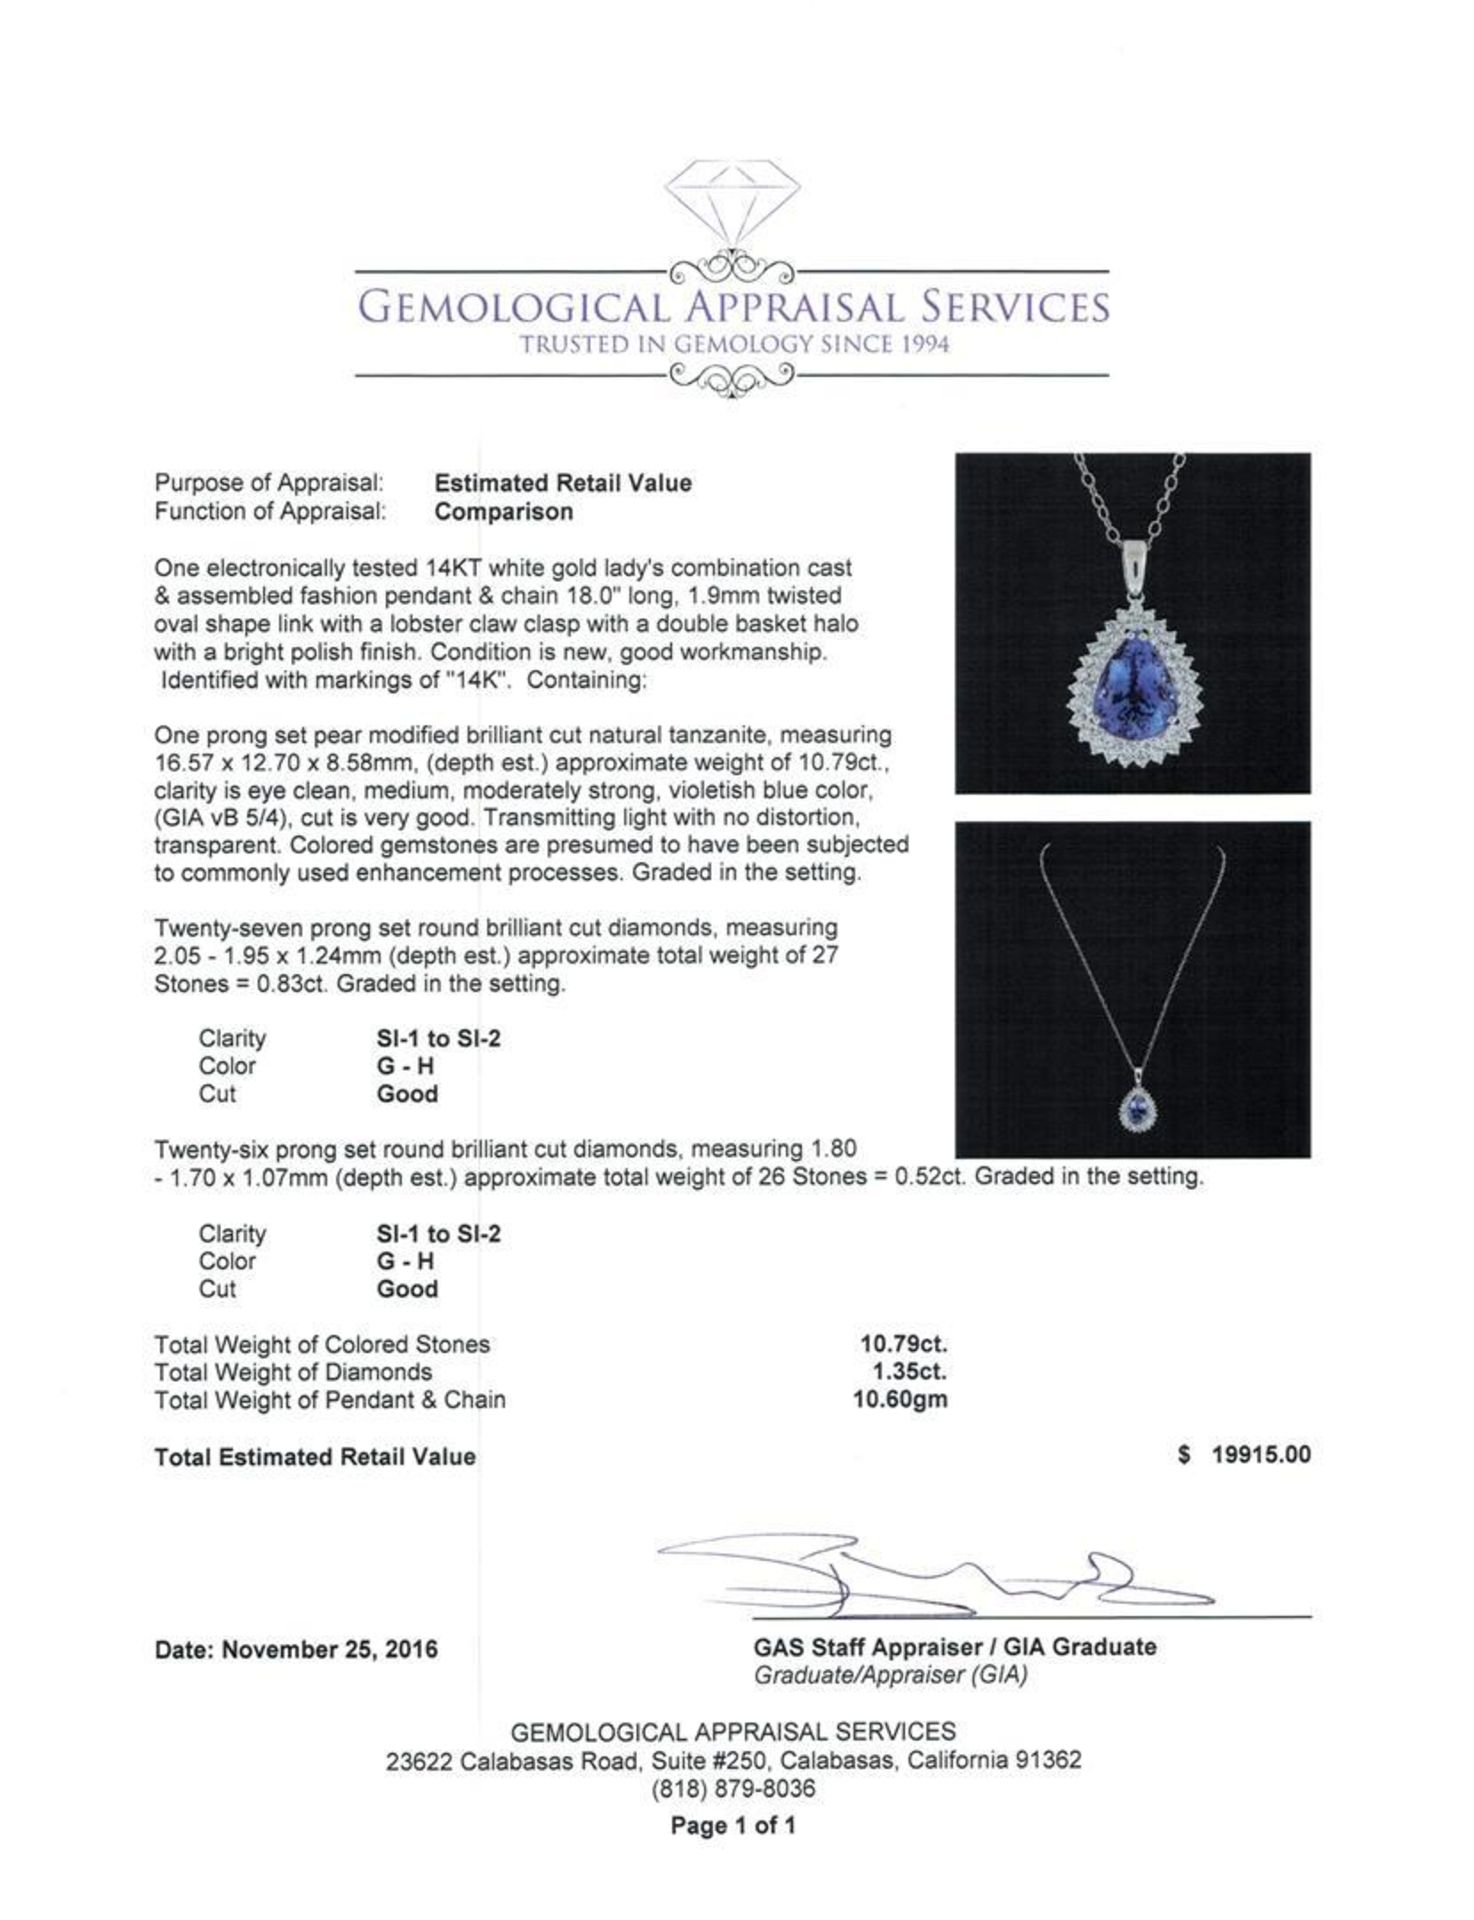 10.79 ctw Tanzanite and Diamond Pendant With Chain - 14KT White Gold - Image 3 of 3